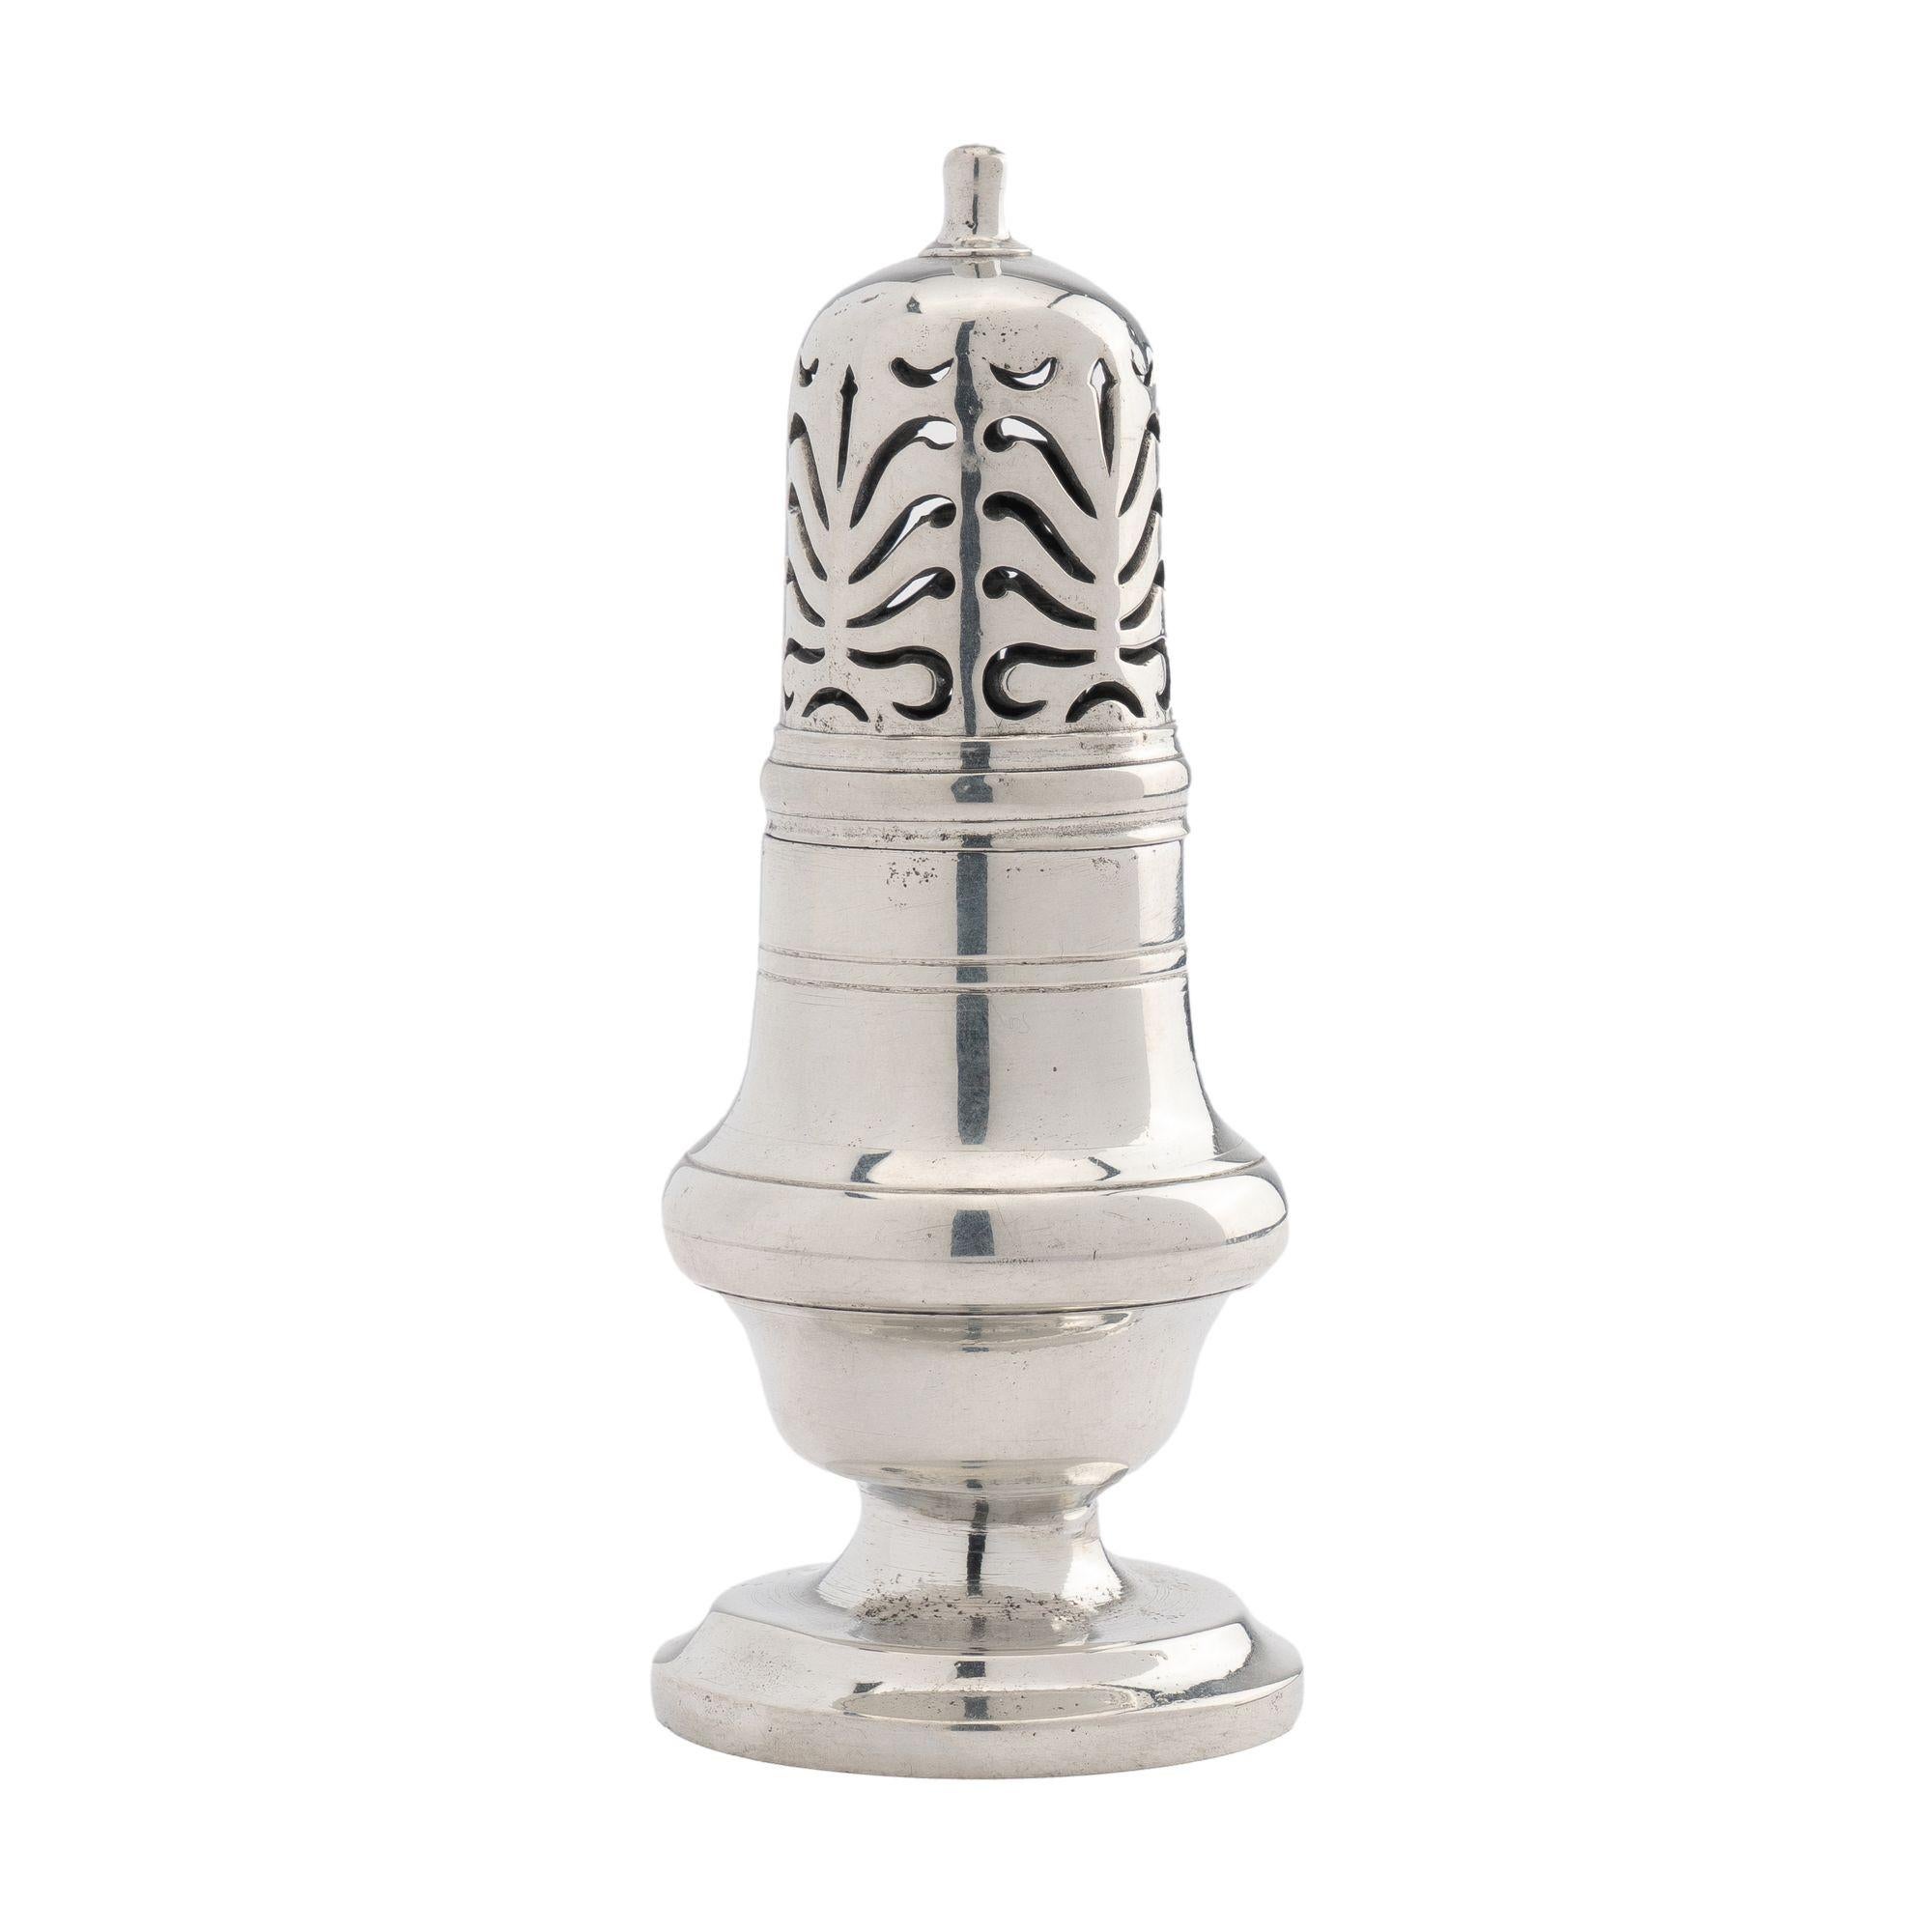 Polished pear shaped pewter sugar castor with Neoclassic anthemion piercing on the threaded top. The castor rests on a circular foot with angel impressed touch mark on the under foot.

Austria, circa 1830.